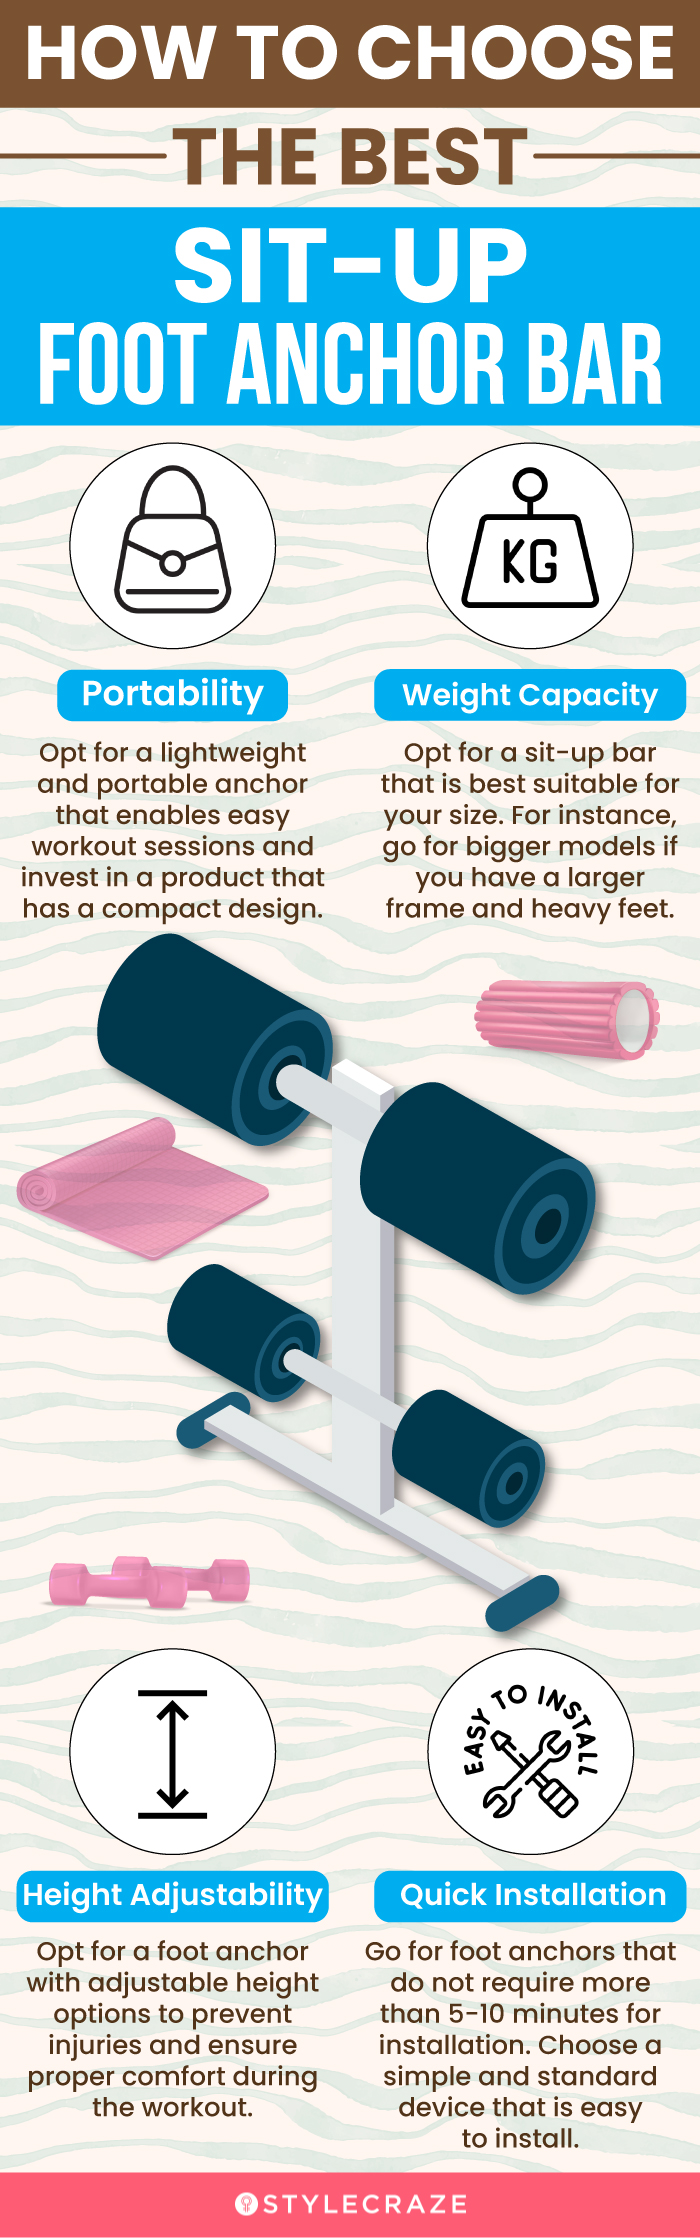 How To Choose The Best Sit-Up Foot Anchor Bar (infographic)